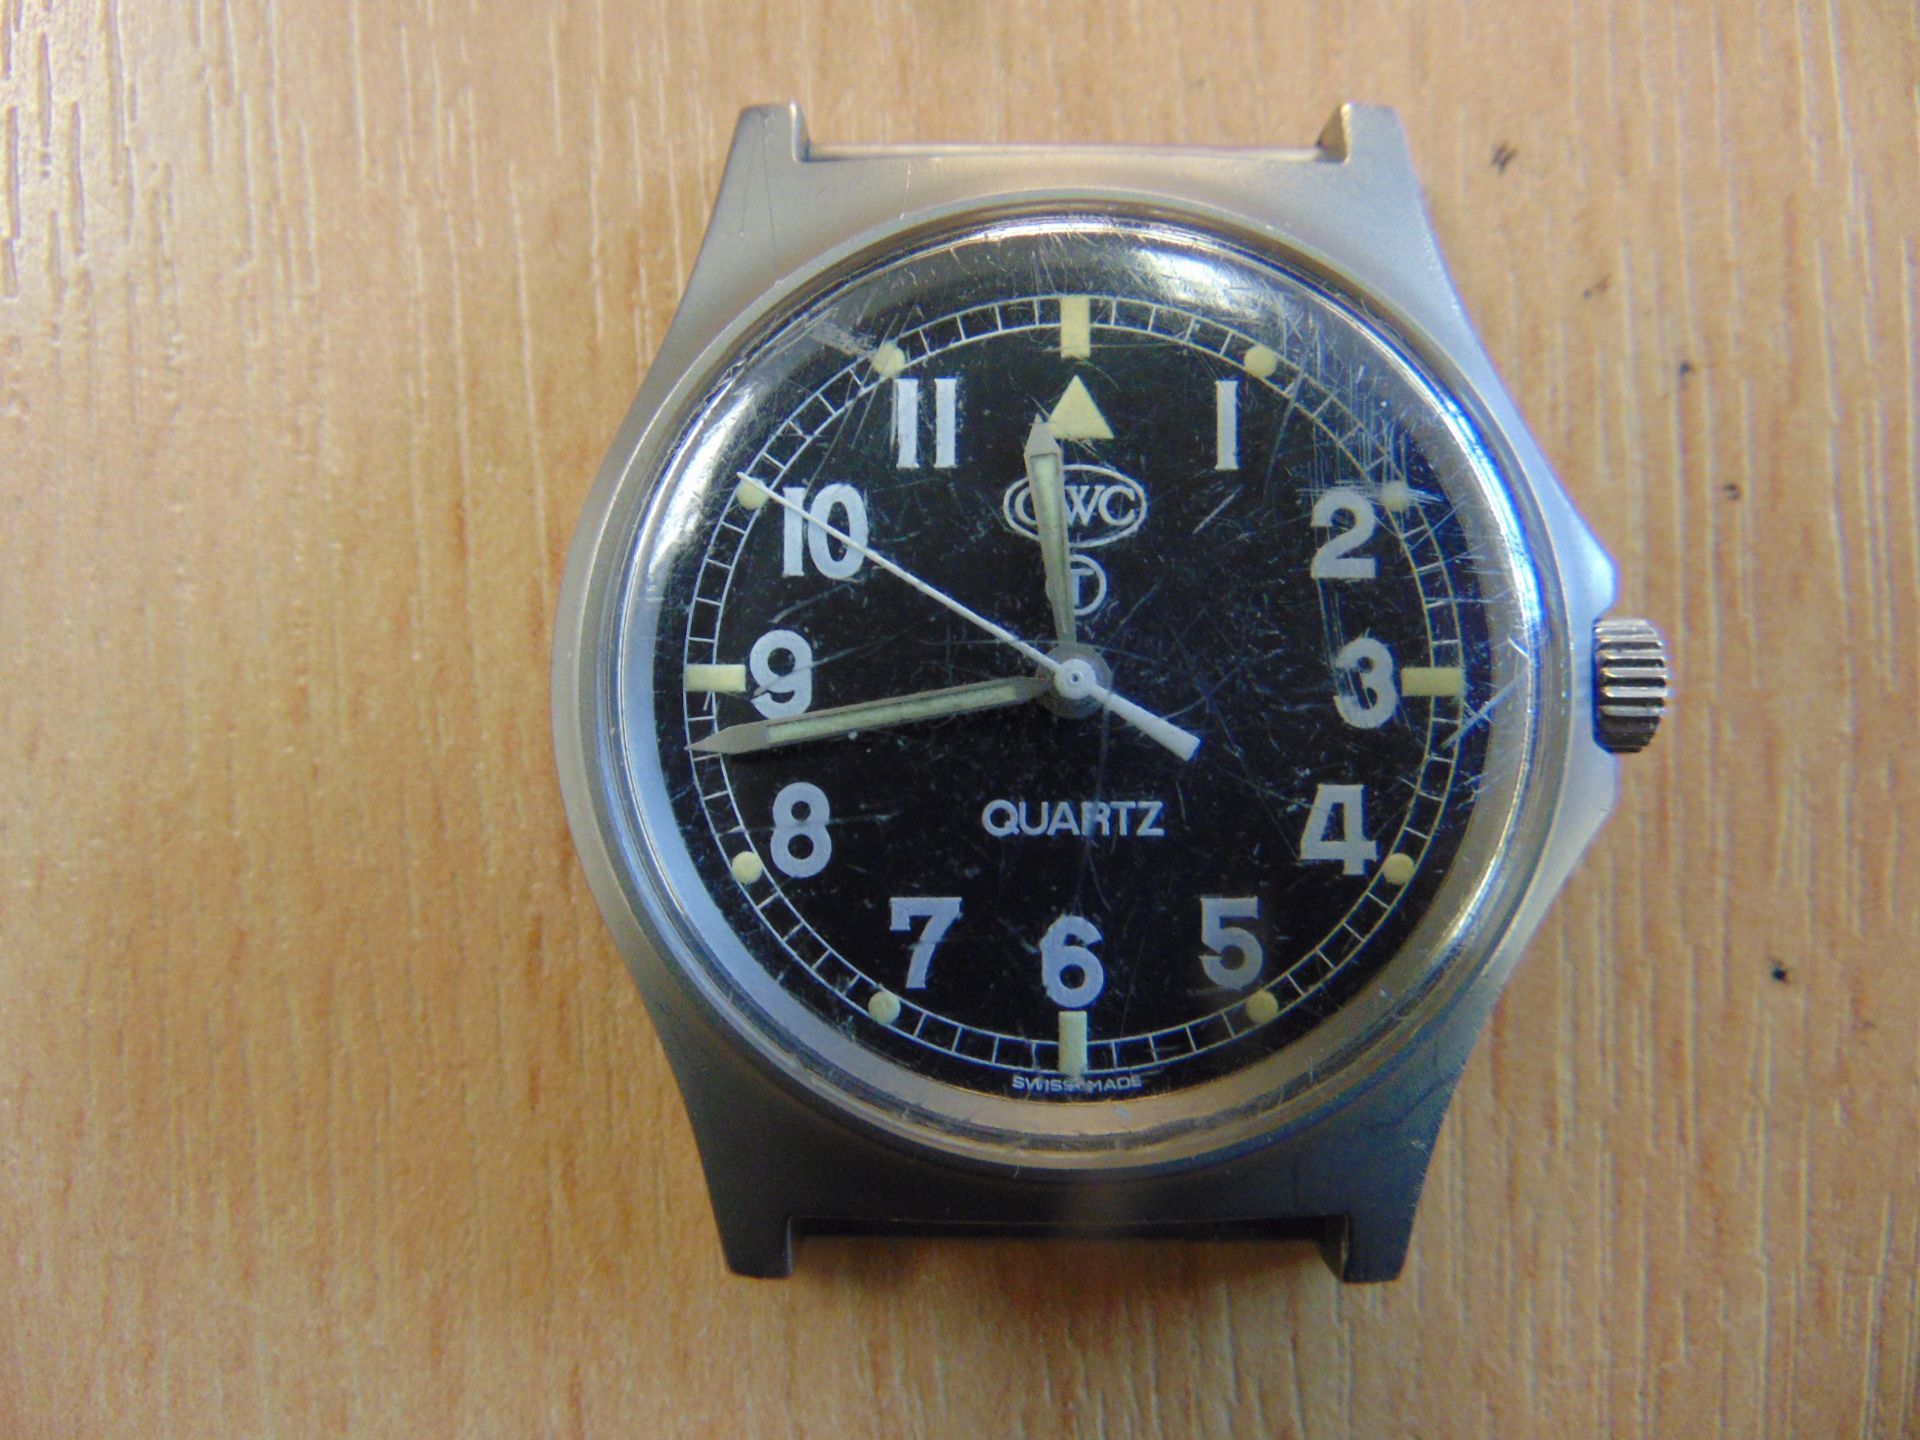 CWC W10 SERVICE WATCH NATO MARKED DATED 1997 - NEW BATTERY/STRAP - Image 3 of 11